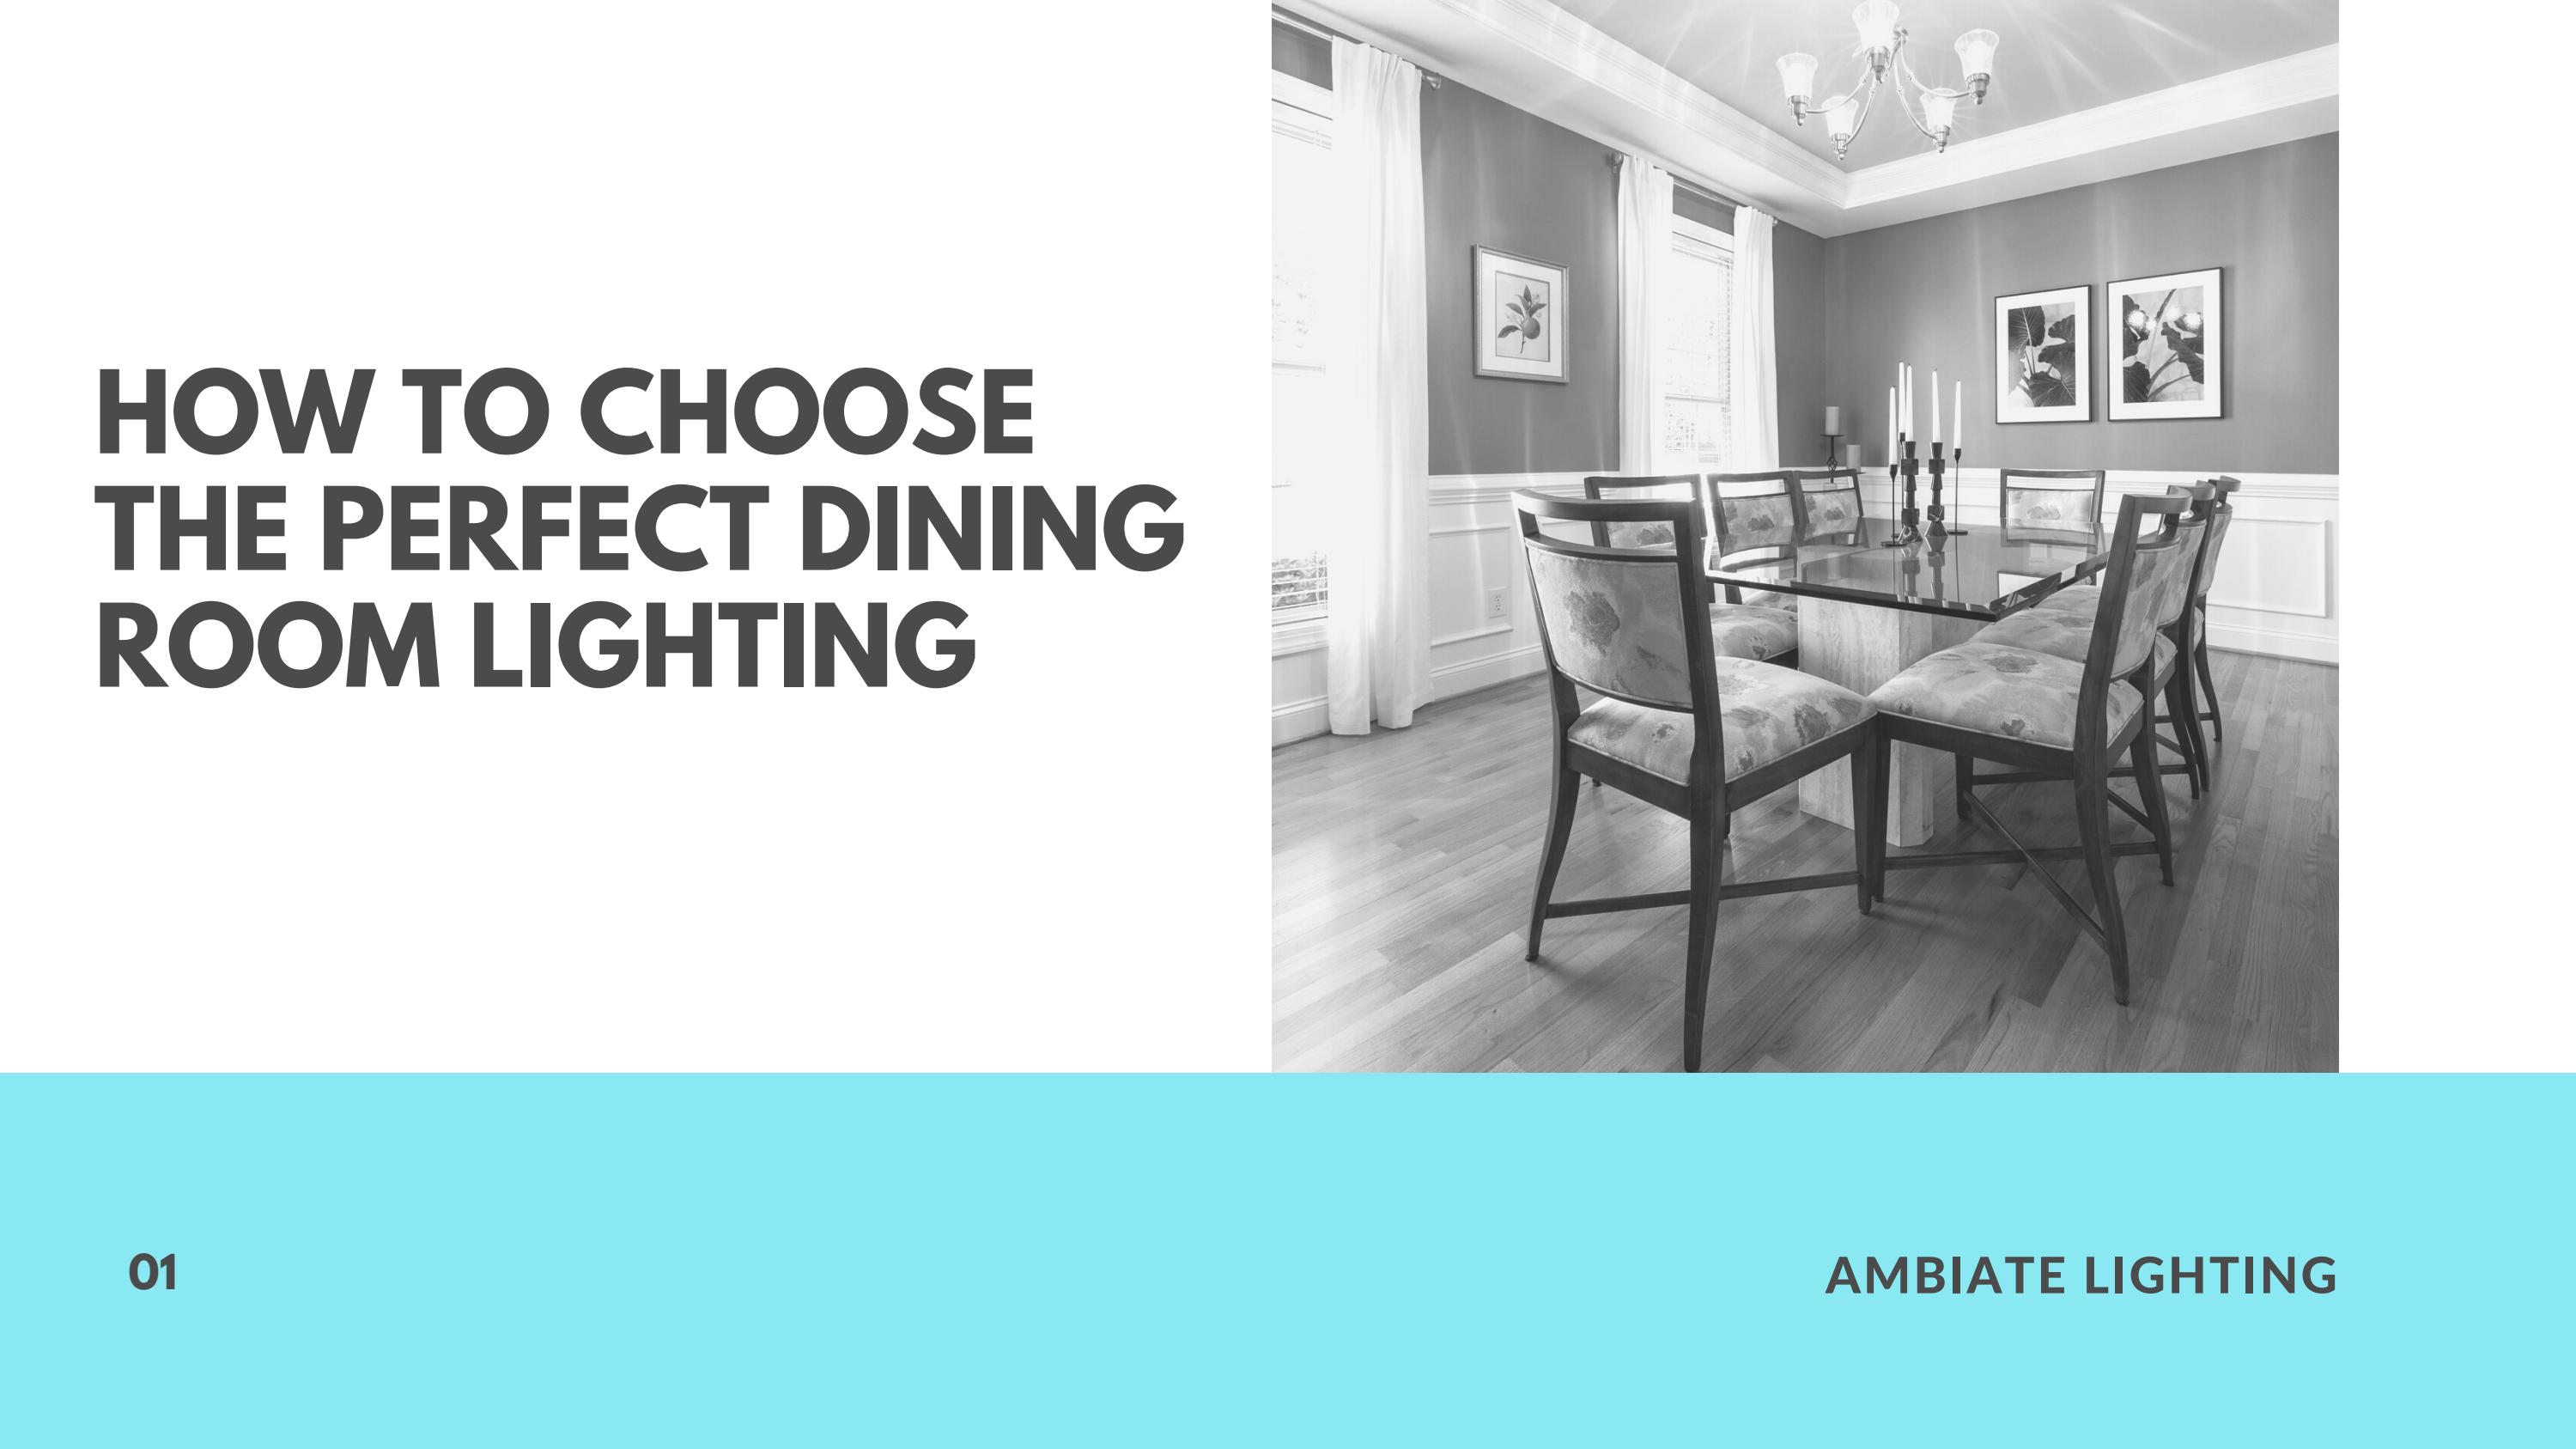 Assess Your Dining Room's Size and Layout: Ambiate Lighting